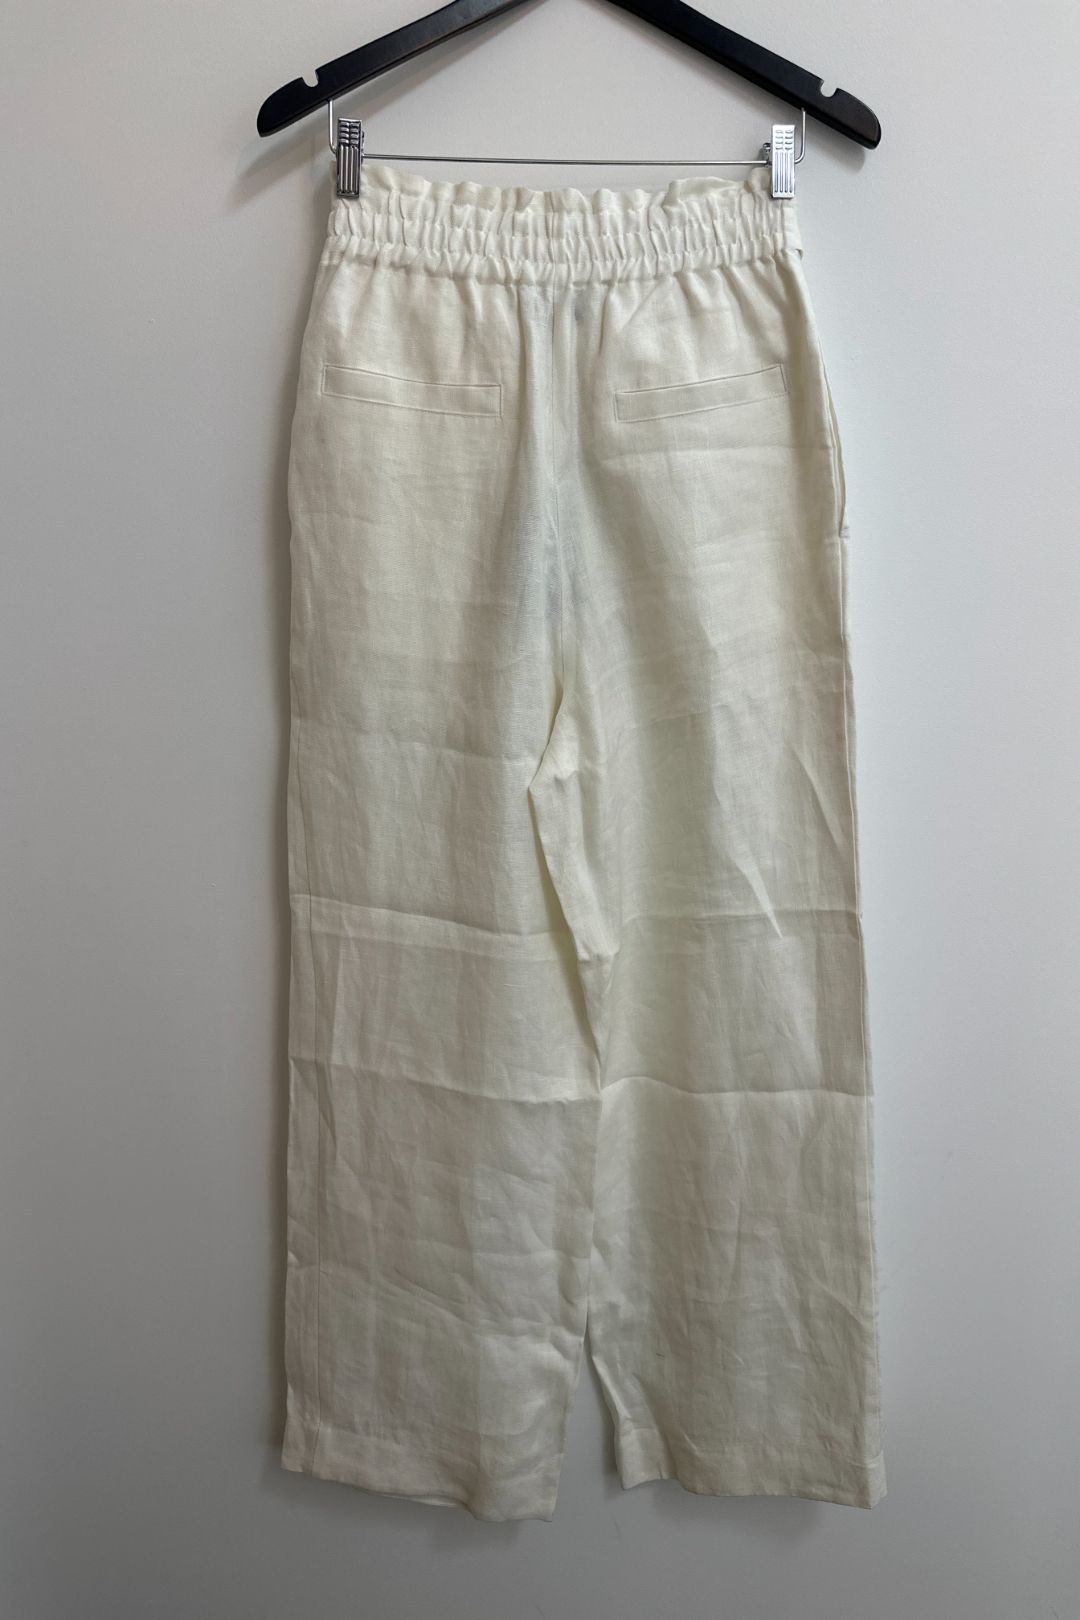 Lee Mathews Amos Relaxed Linen Pant in Natural